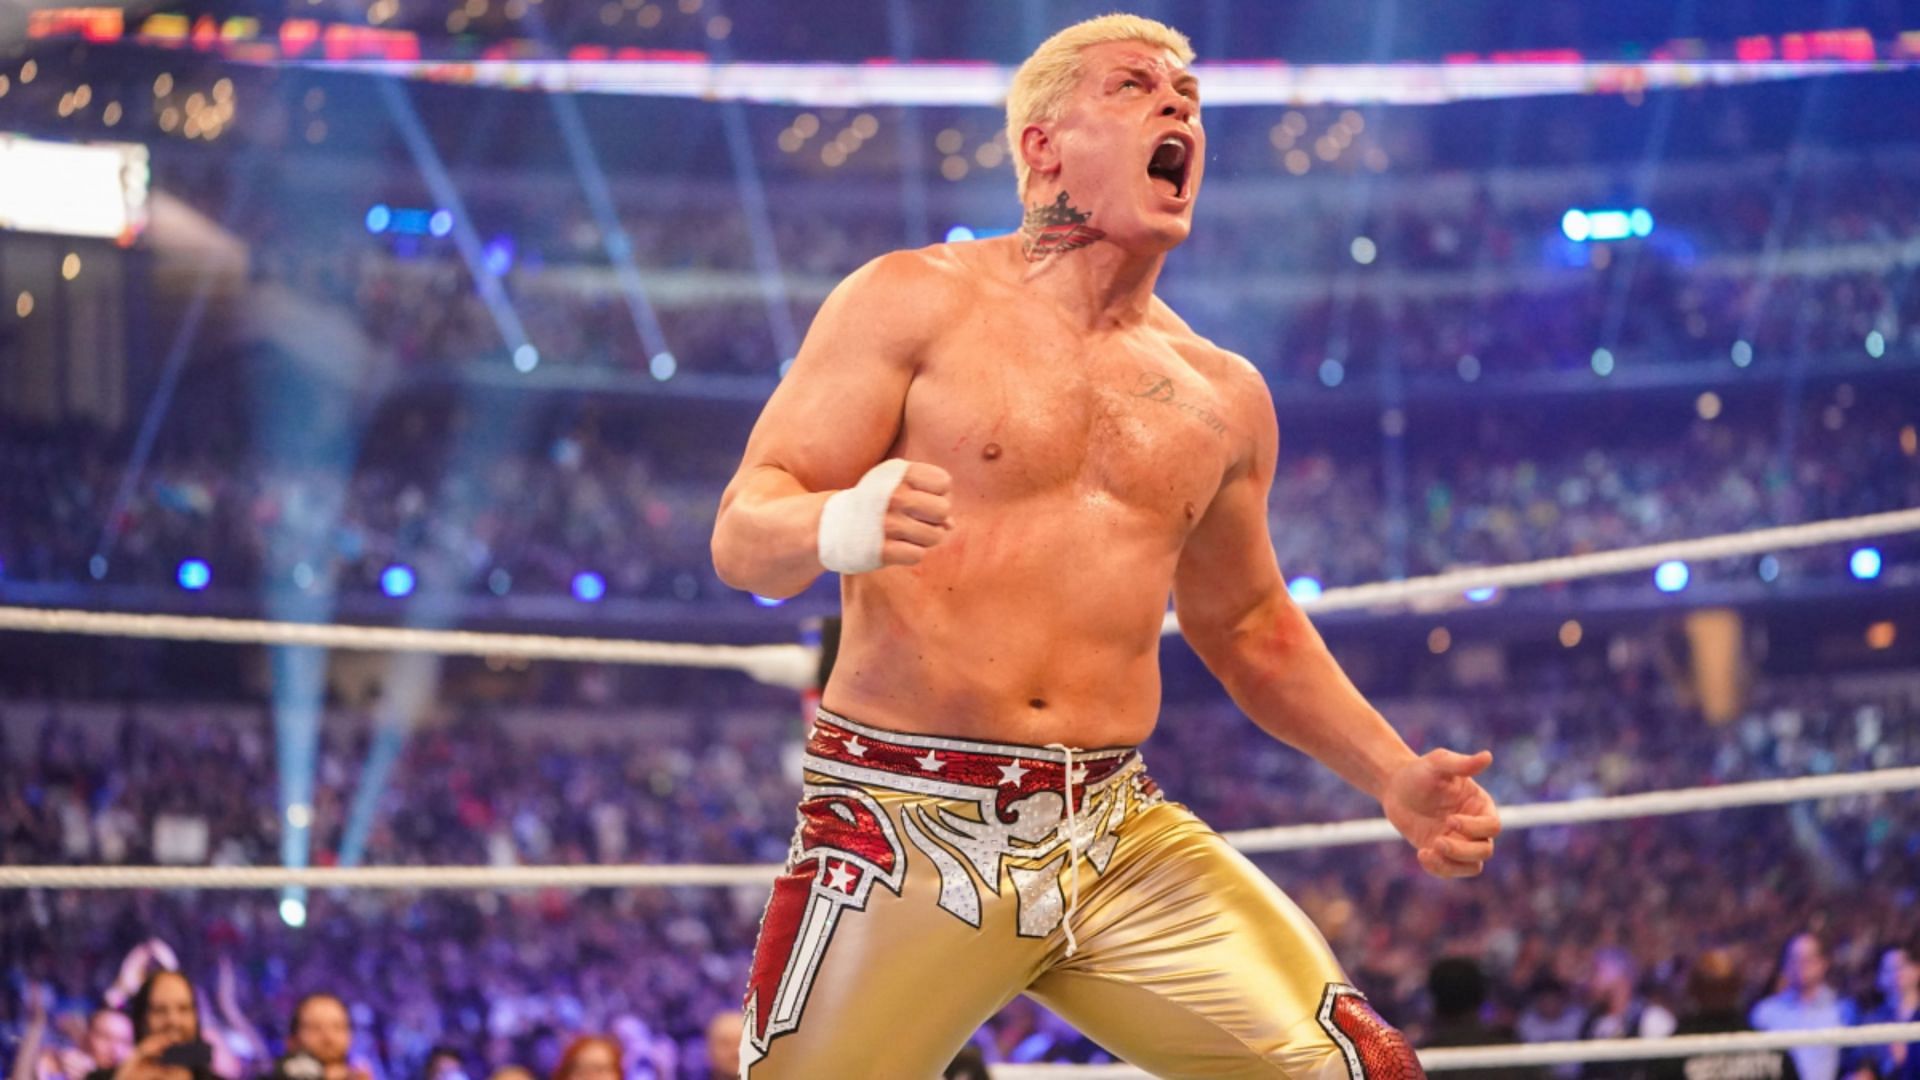 Cody Rhodes returned to WWE last April at WrestleMania 38